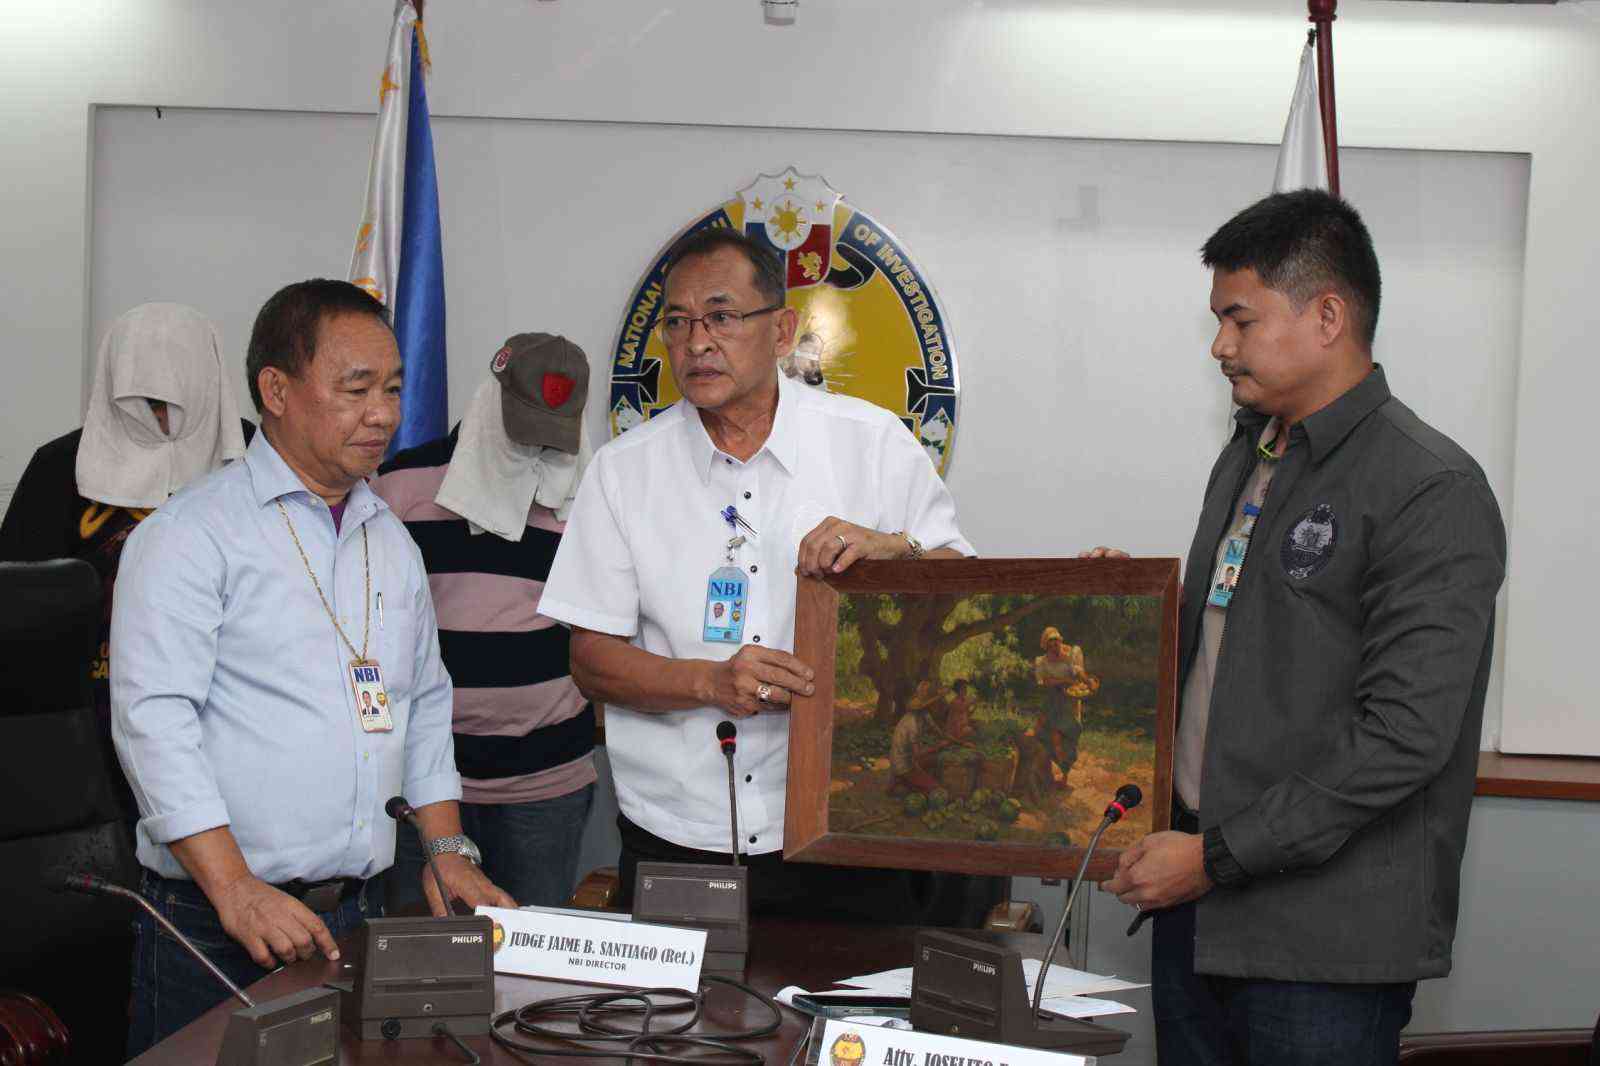 NBI recovers stolen Amorsolo painting, 2 suspects arrested